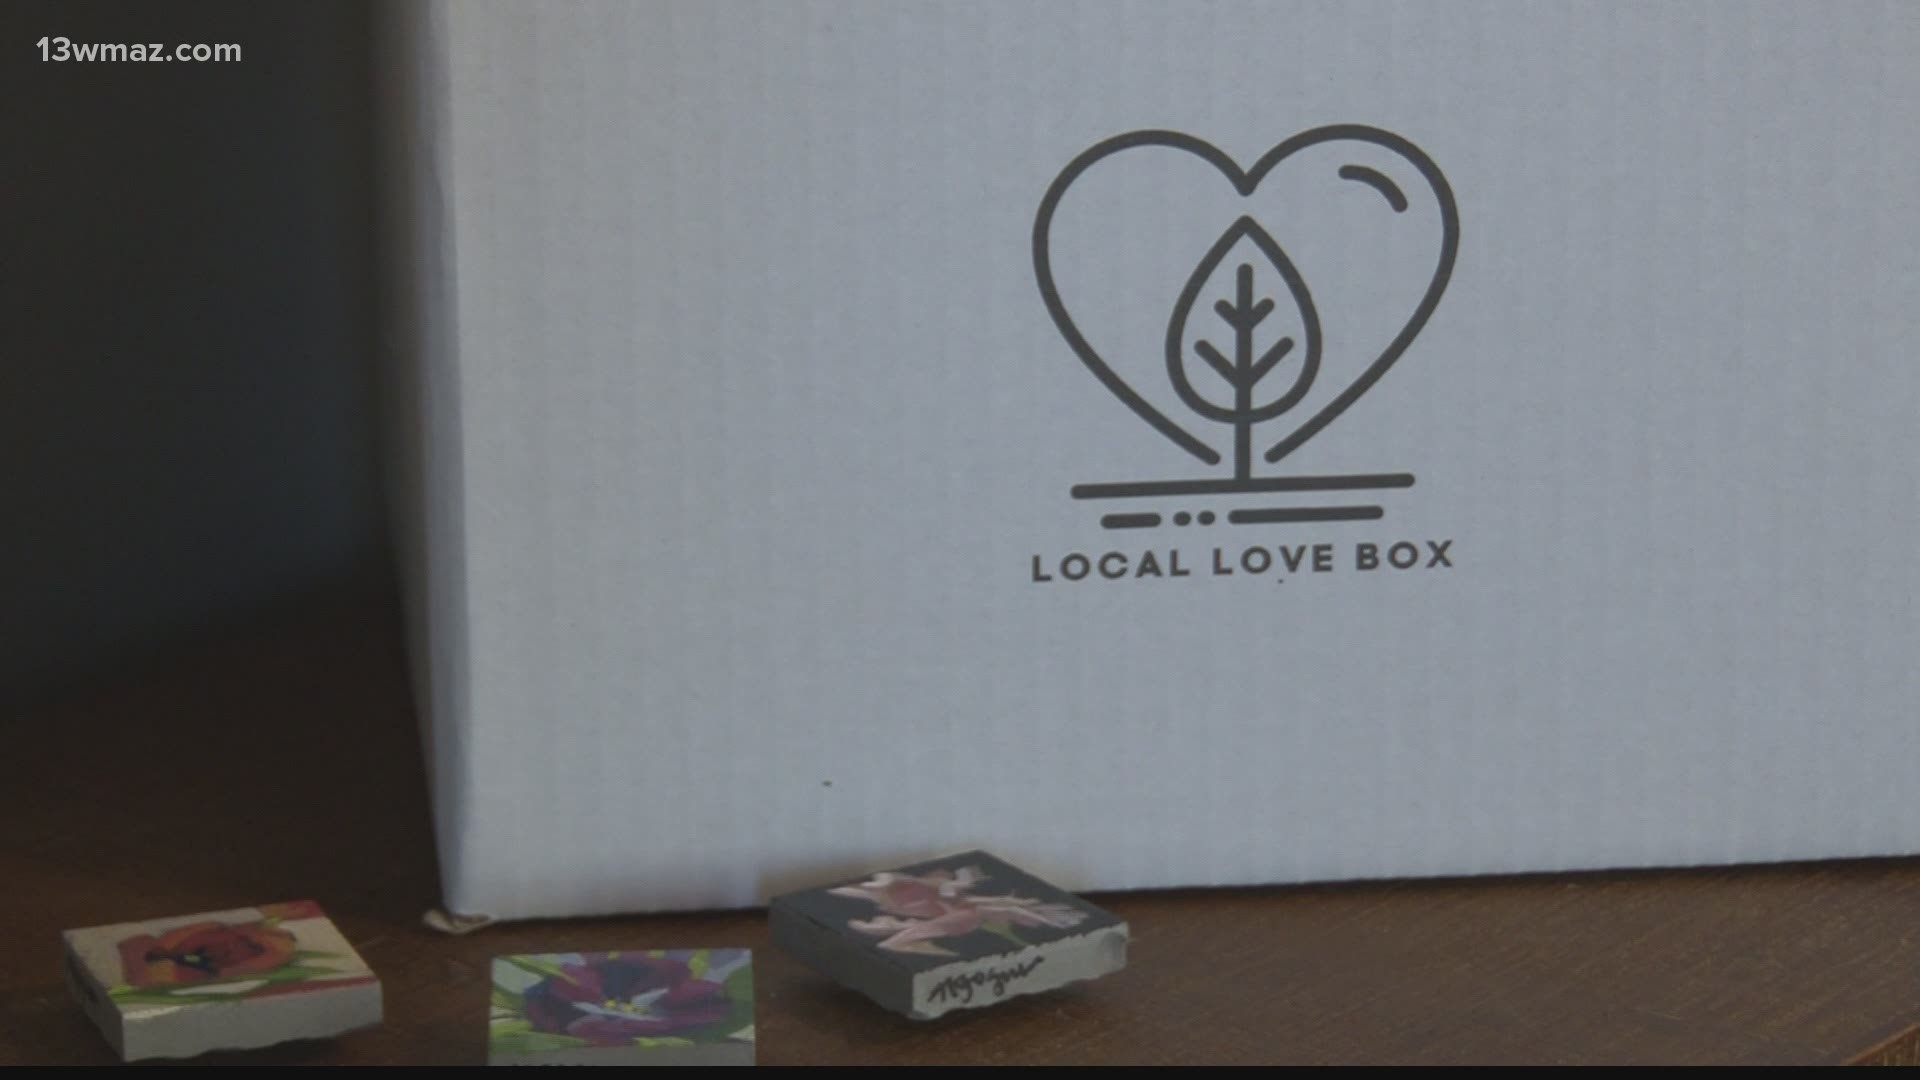 The quarterly Local Love Boxes will be filled with items from across central Georgia. The first one has a shirt candles, hand-painted tile magnets, and more.